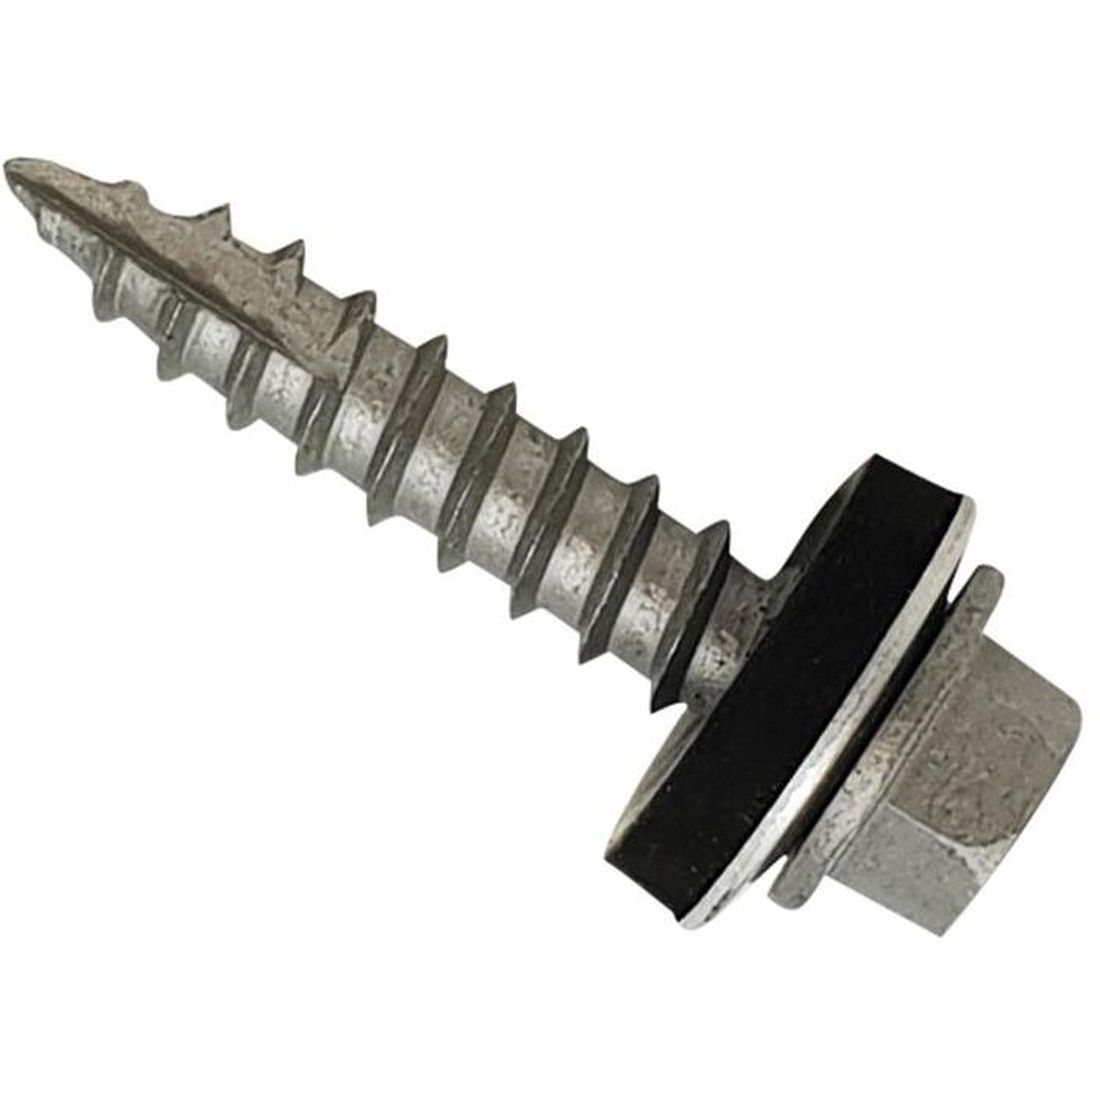 ForgeFix TechFast Metal Roofing to Timber Hex Screw T17 Gash Point 6.3 x 125mm Box 50    